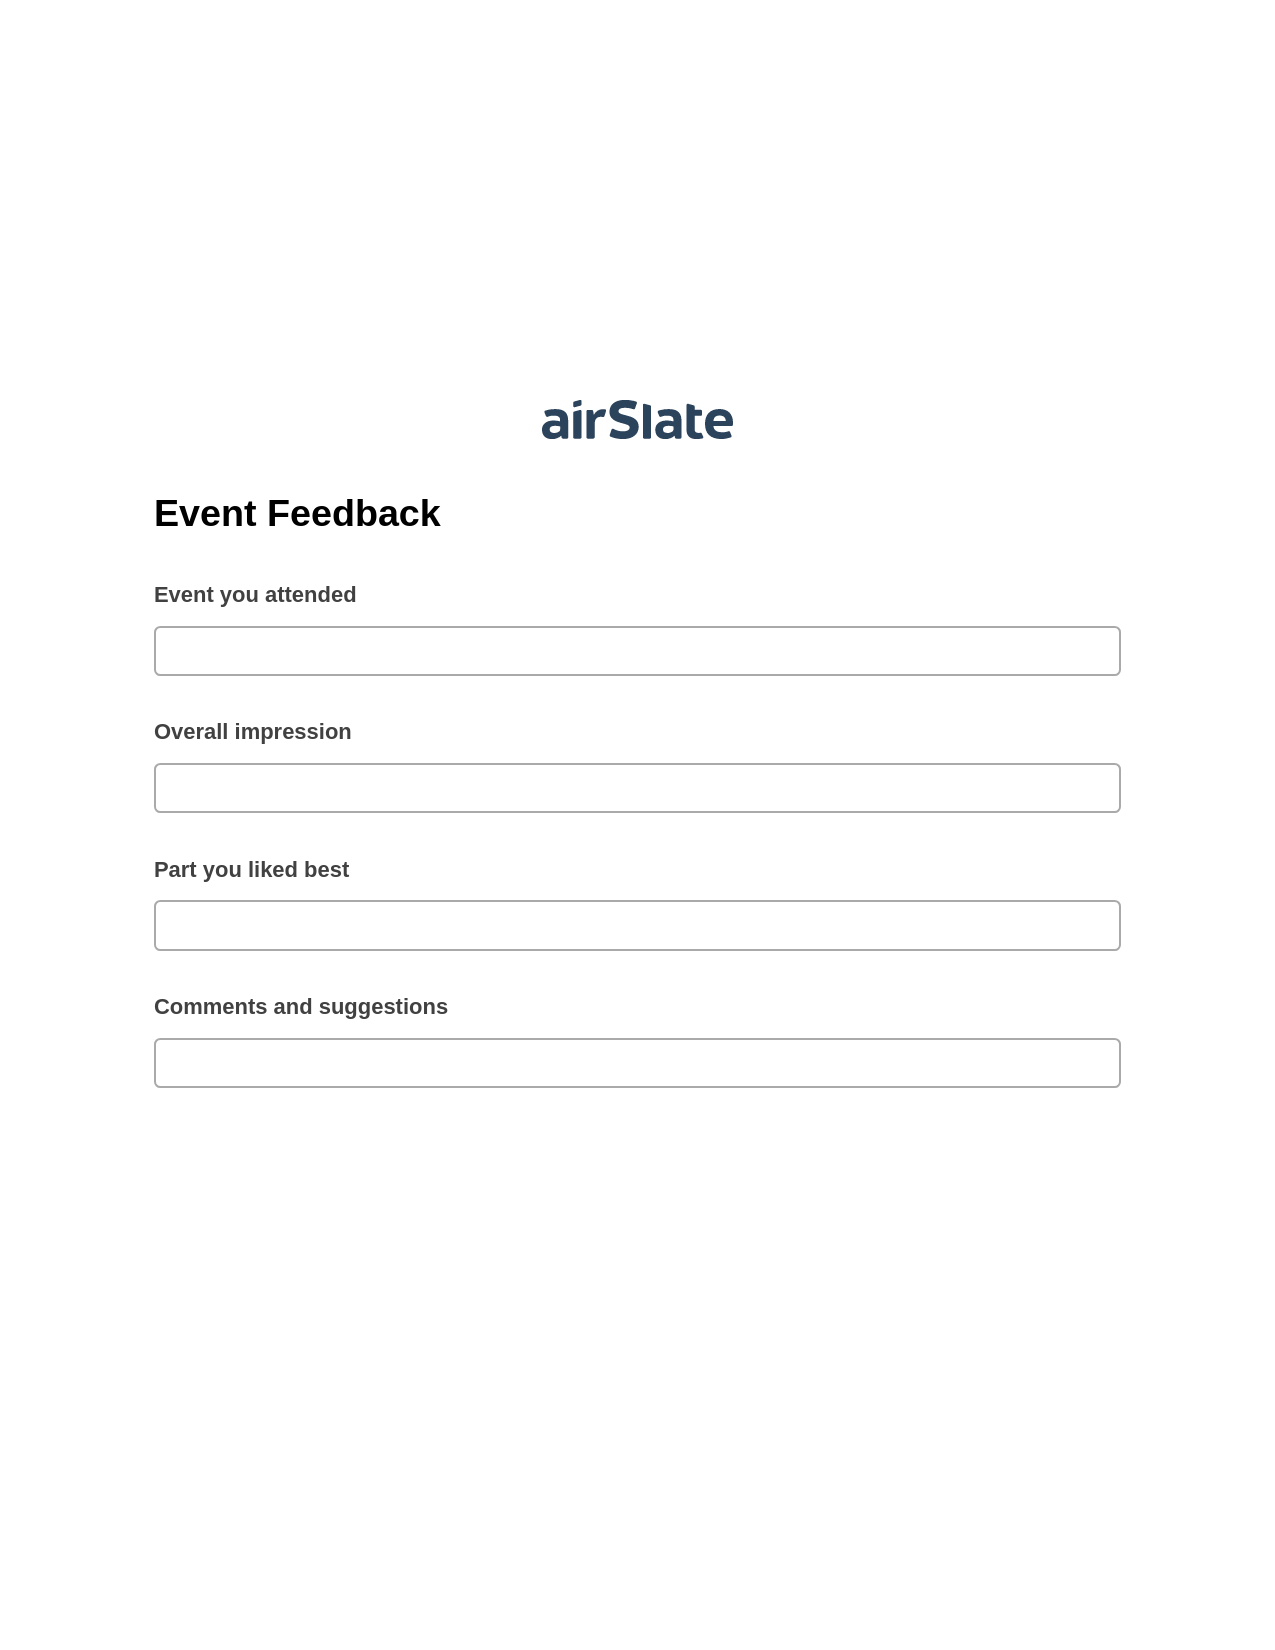 Event Feedback Pre-fill from Google Sheets Bot, Create Salesforce Record Bot, Export to Salesforce Bot